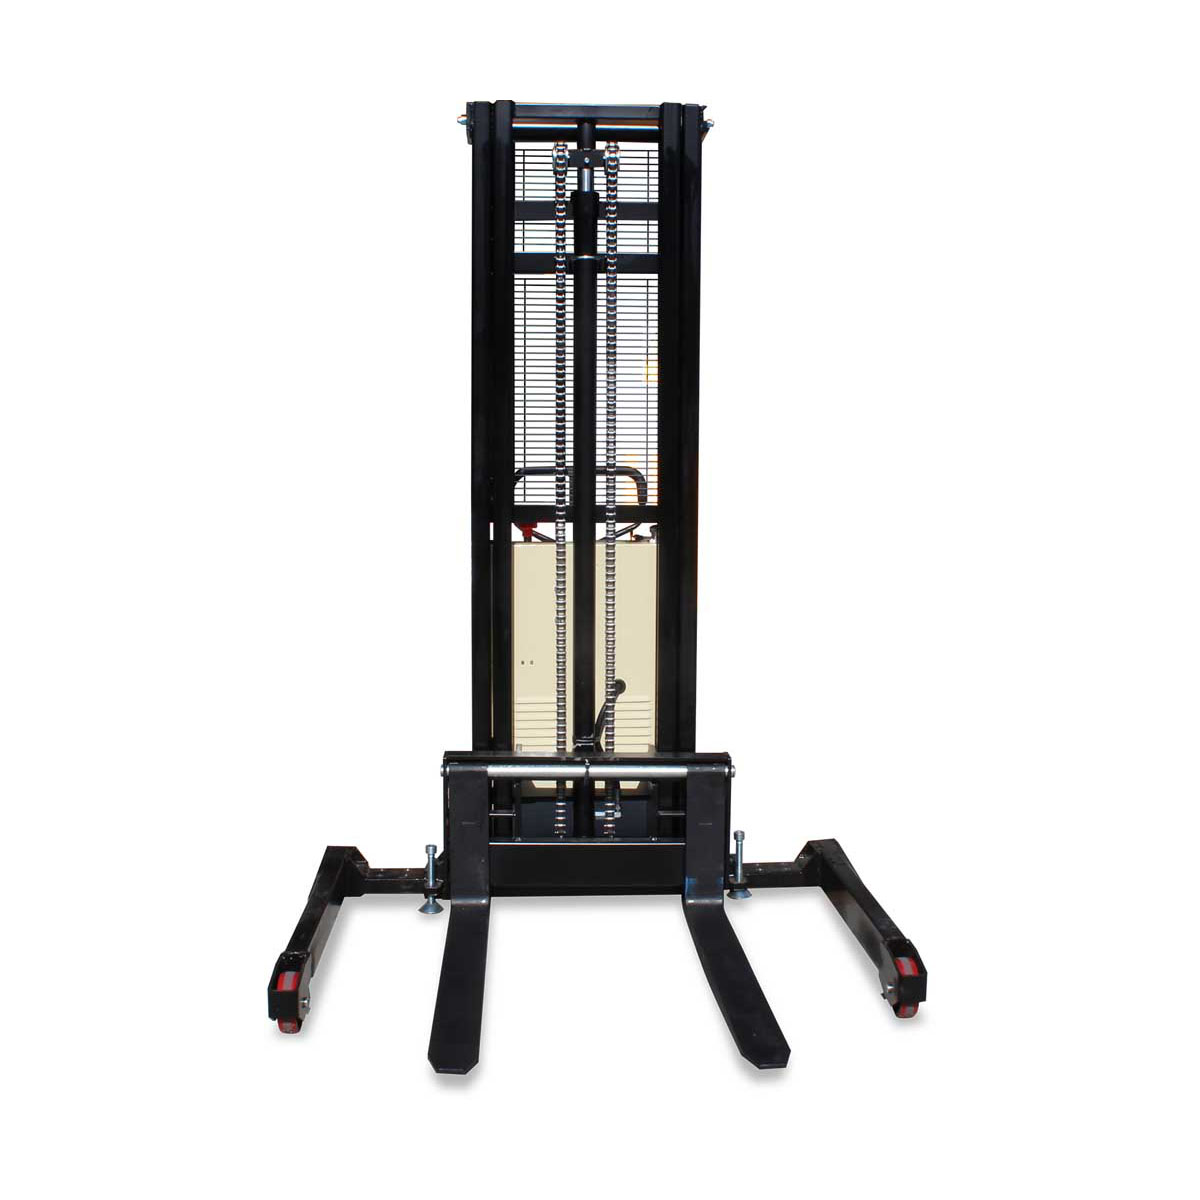 Buy Semi-Electric Straddle Stacker in Pallet Stackers from Astrolift NZ